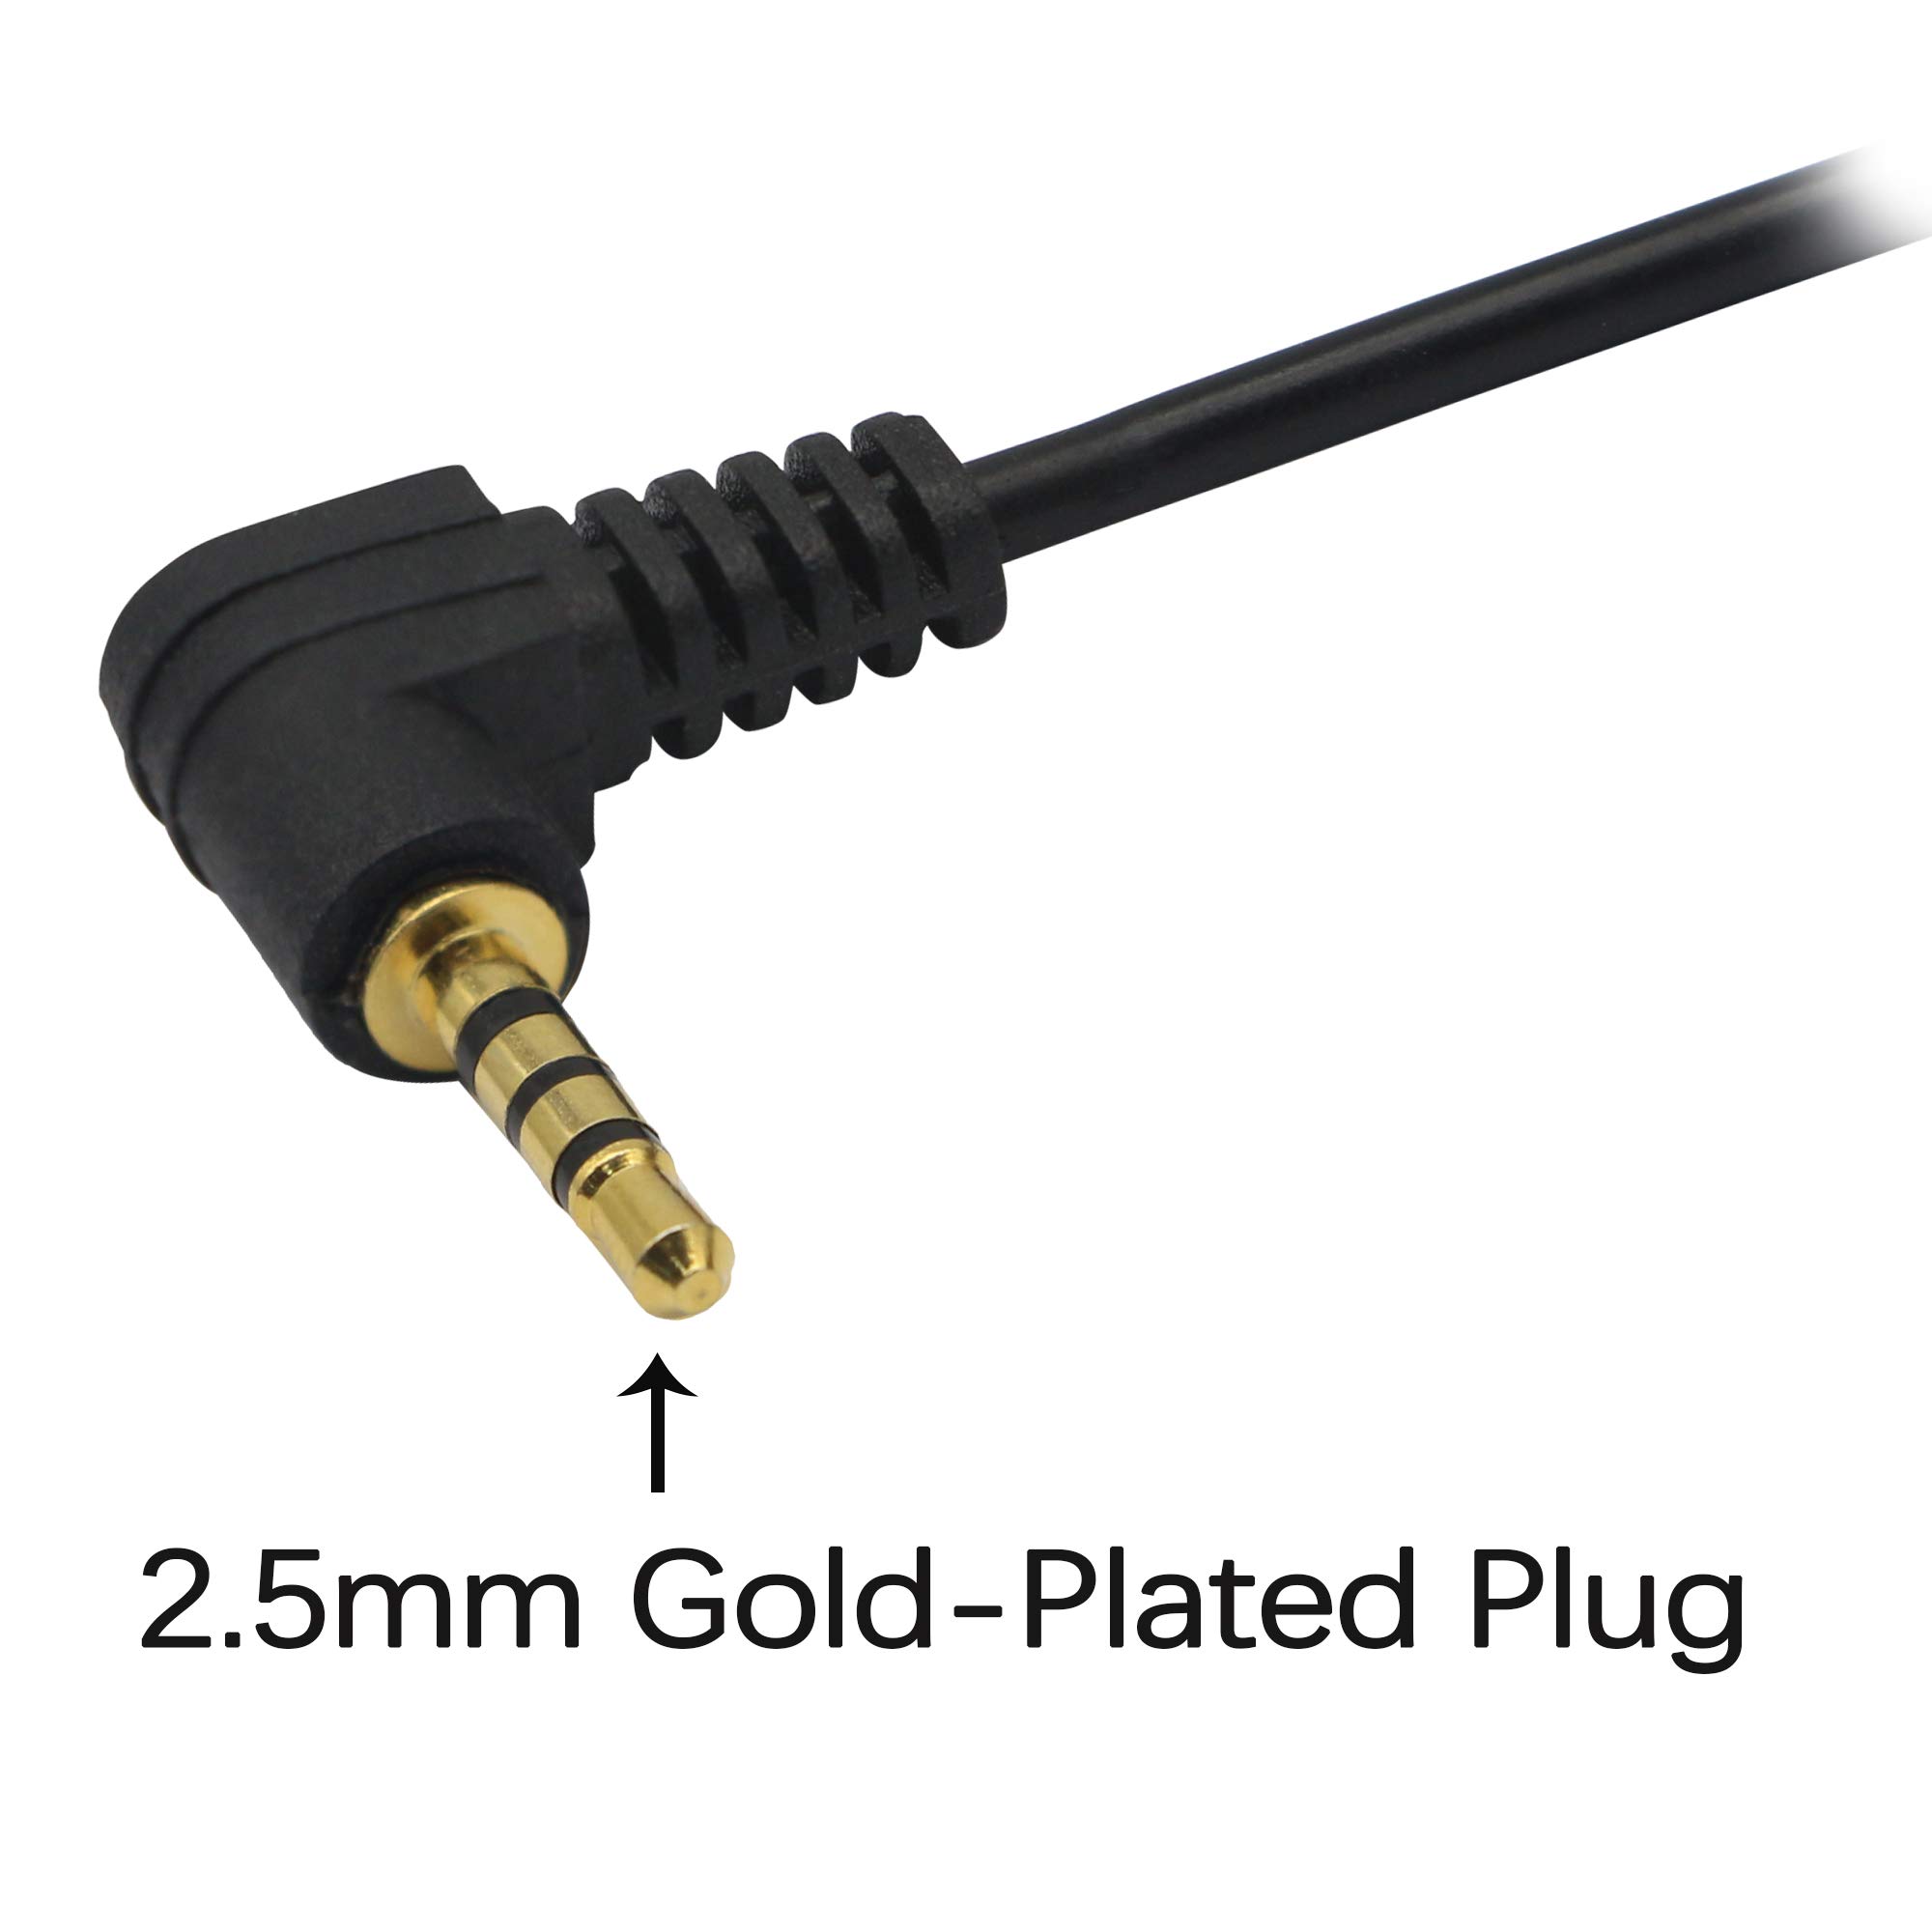 3.3 Feet 2.5mm 4 Pole Stereo Male Plug to Bare Wire, Stereo 2.5mm Plug Jack Connector Audio Cable YOUCHENG for Headphone, Microphone, Cable Repair(2-Pack)